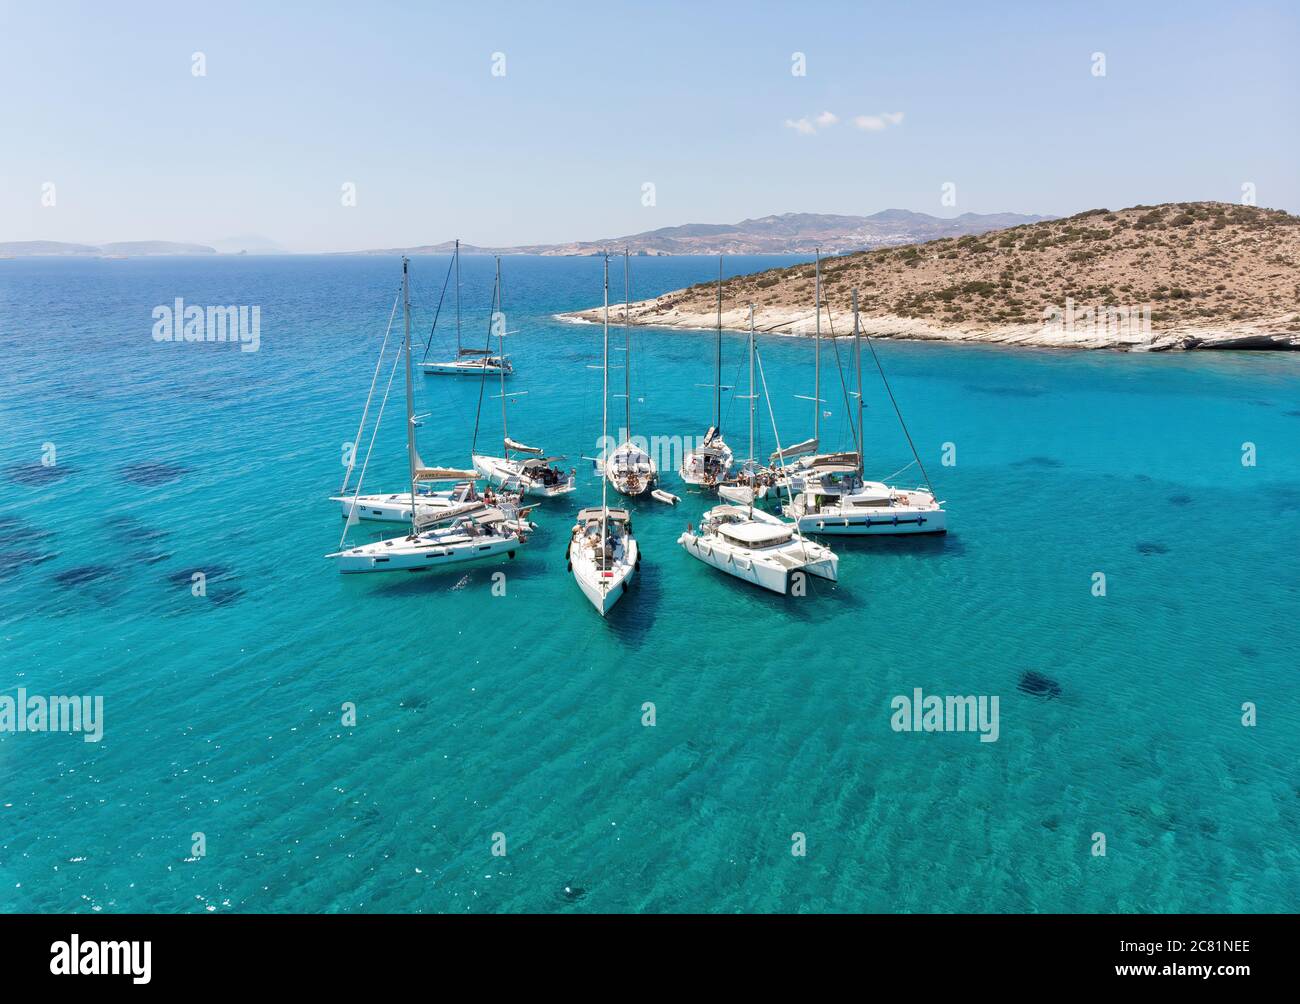 Polyaigos, Cyclades / Greece: 14 May 2018: Sailing boats in star formation. Polyaigos is the largest uninhabited island of the Aegean Sea and one of t Stock Photo